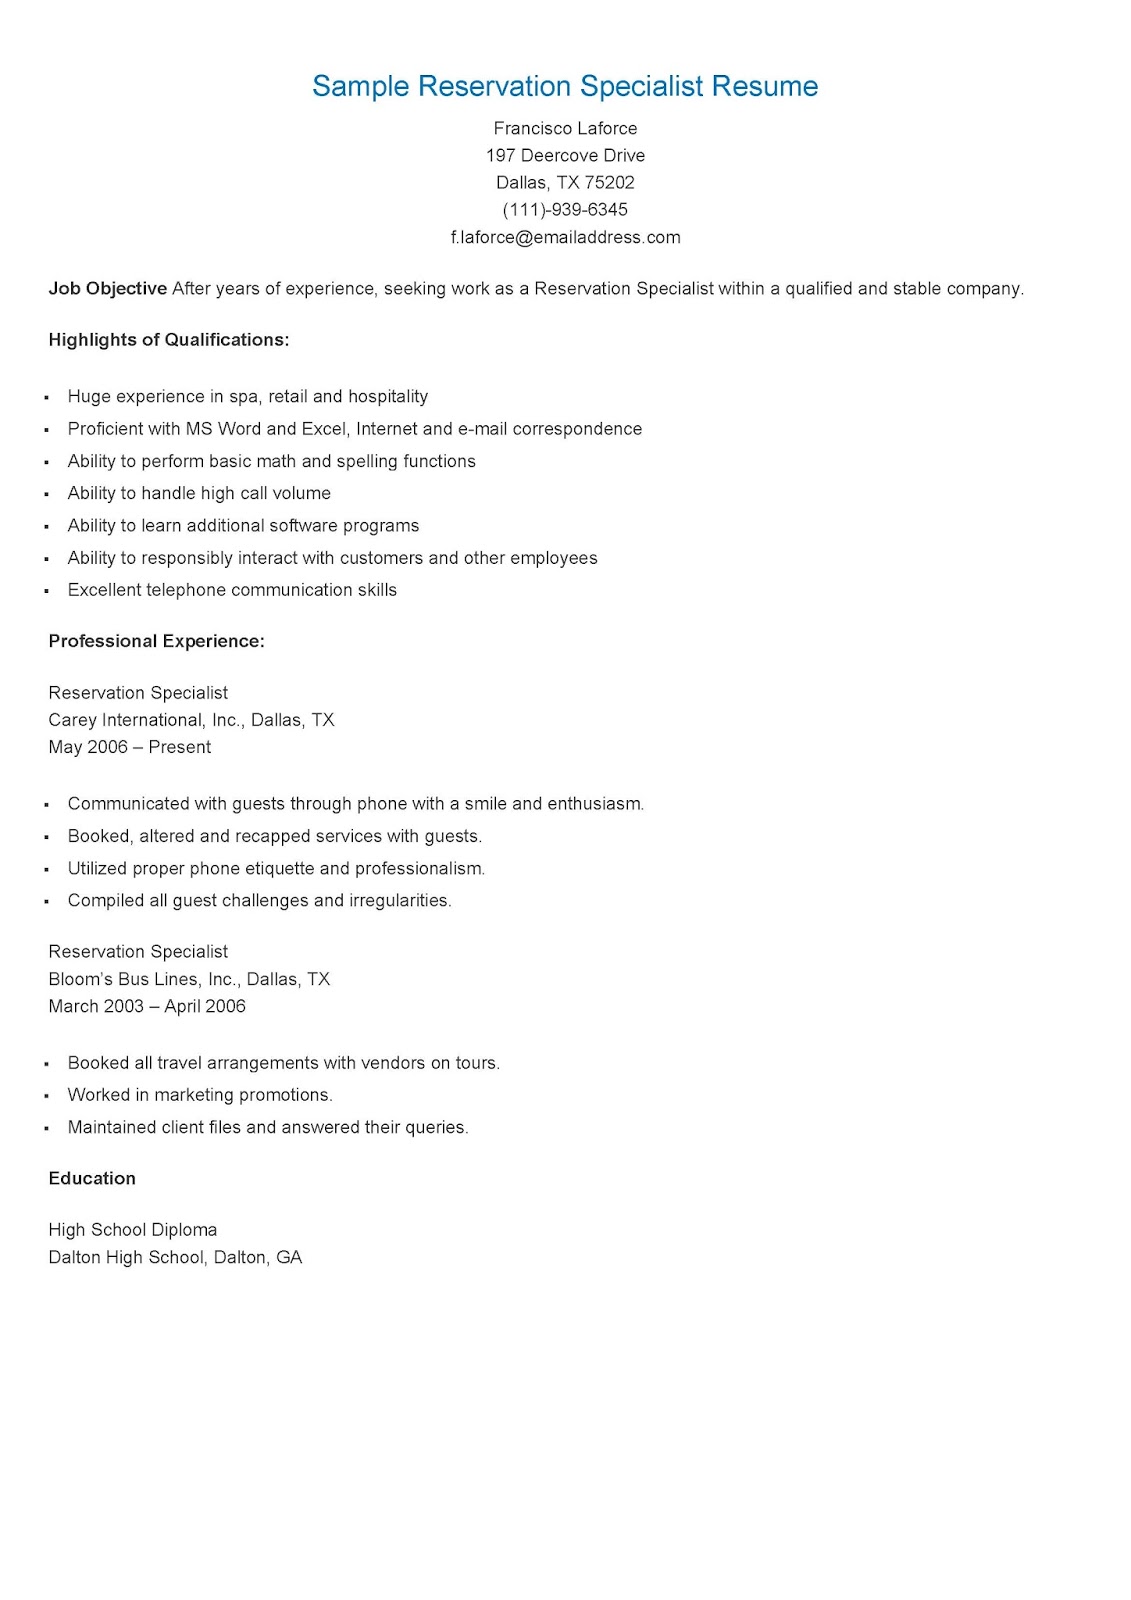 Administrative support specialist resume sample